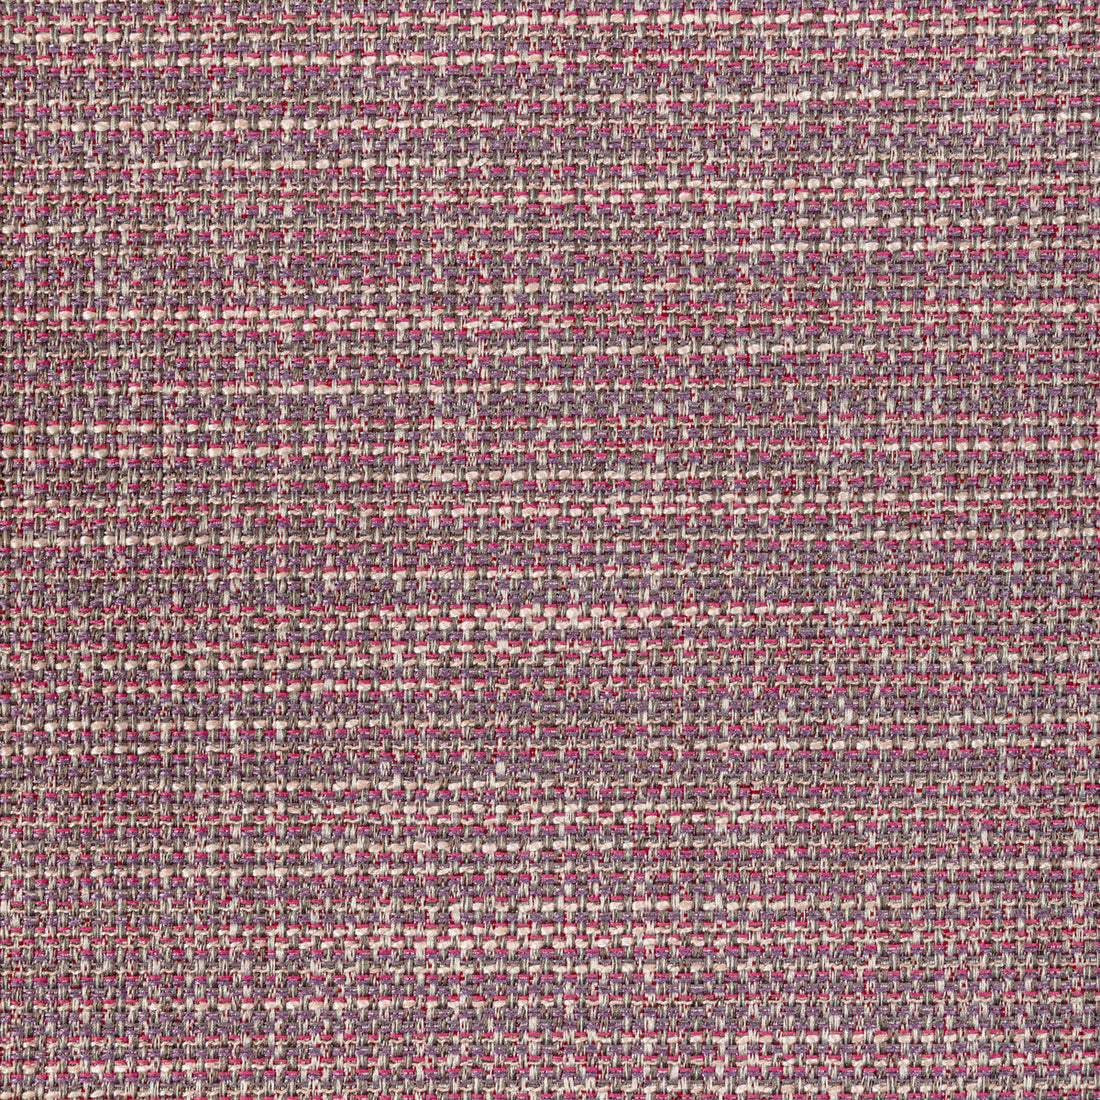 Luma Texture fabric in wisteria color - pattern 4947.110.0 - by Kravet Contract in the Fr Window Luma Texture collection